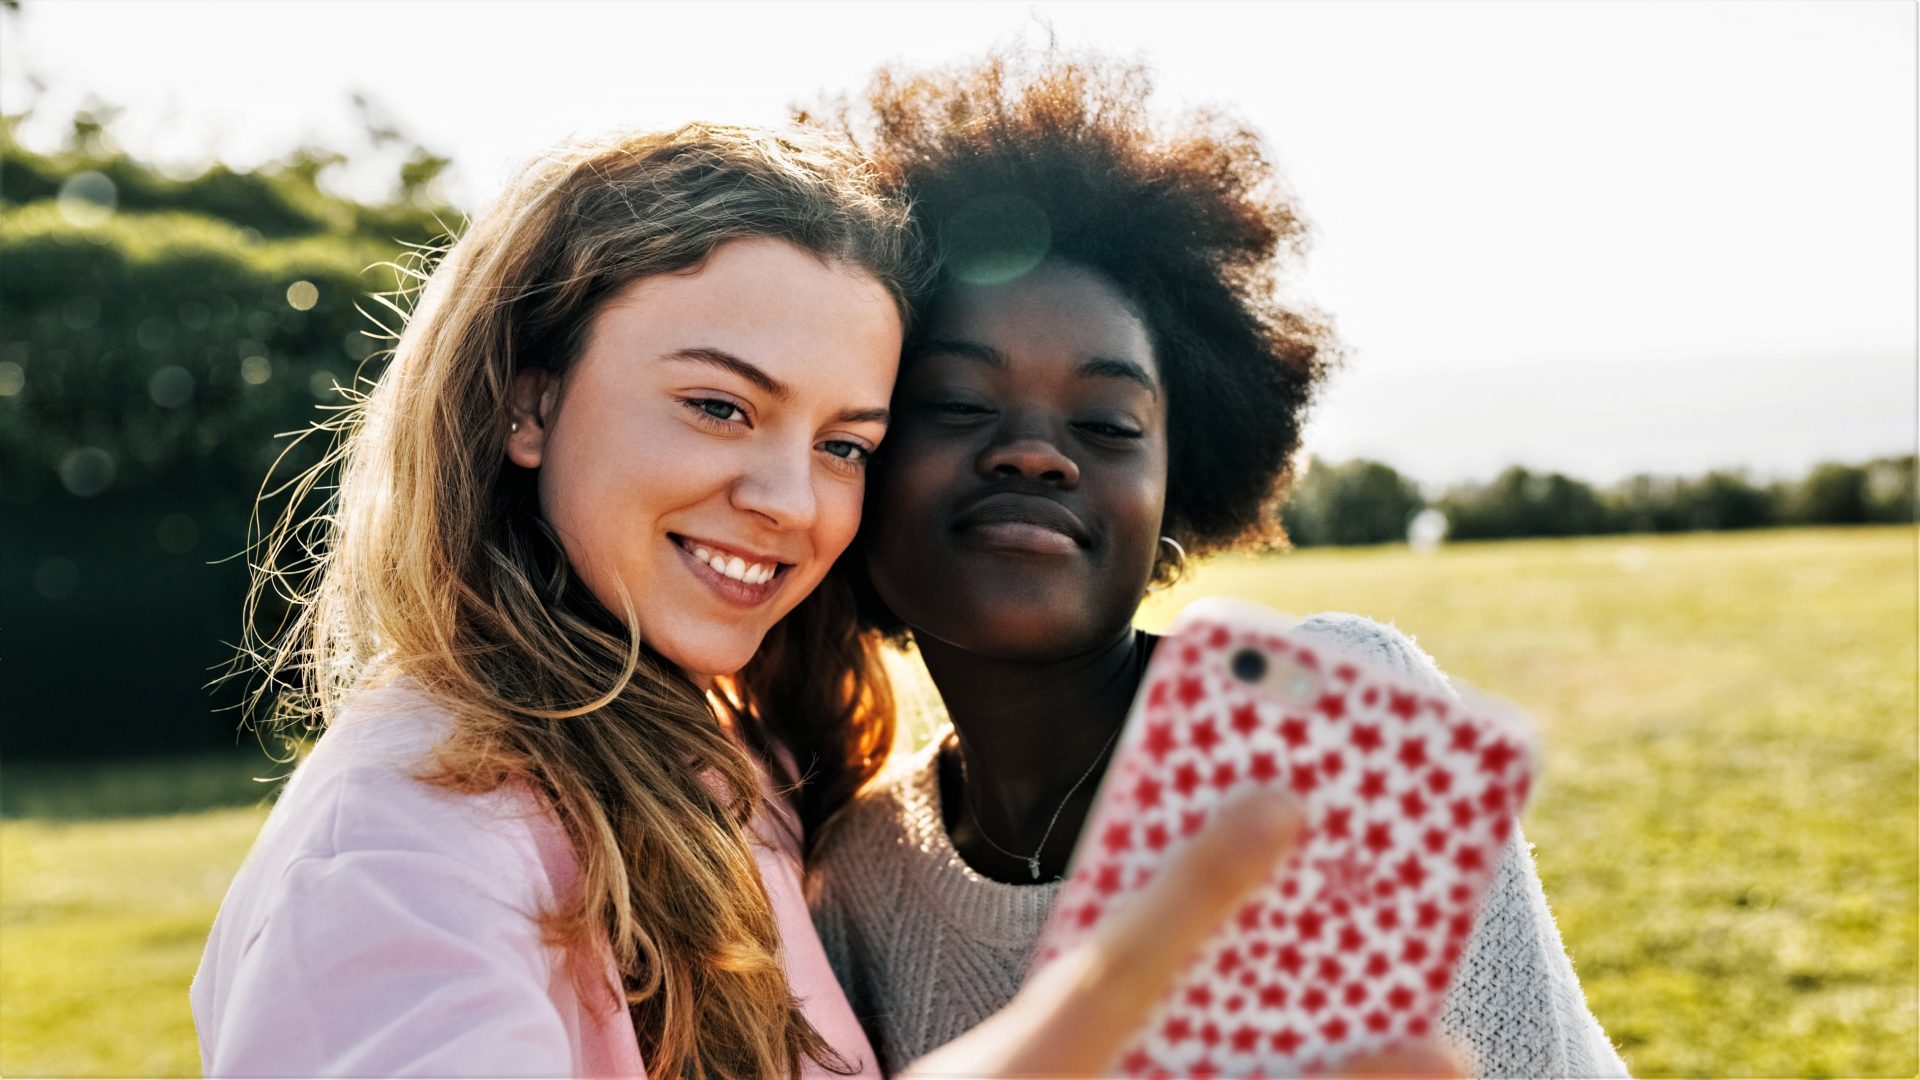 Photo of two girls taking a selfie in a field using a smartphone